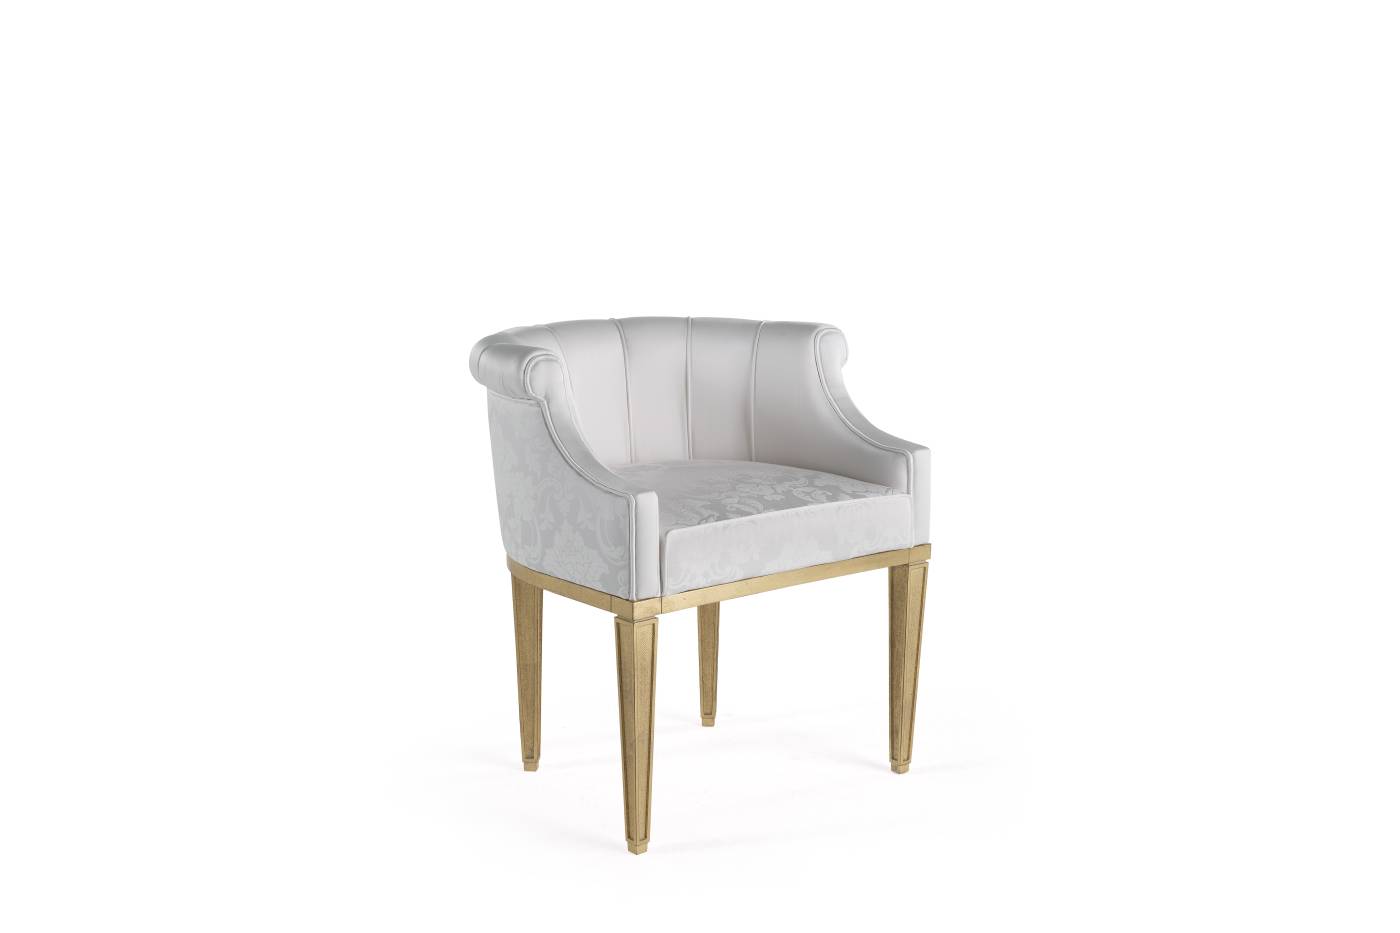 FUJI chair with armrests – Transform your space with luxury Made in Italy classic chairs of Oro Bianco collection.